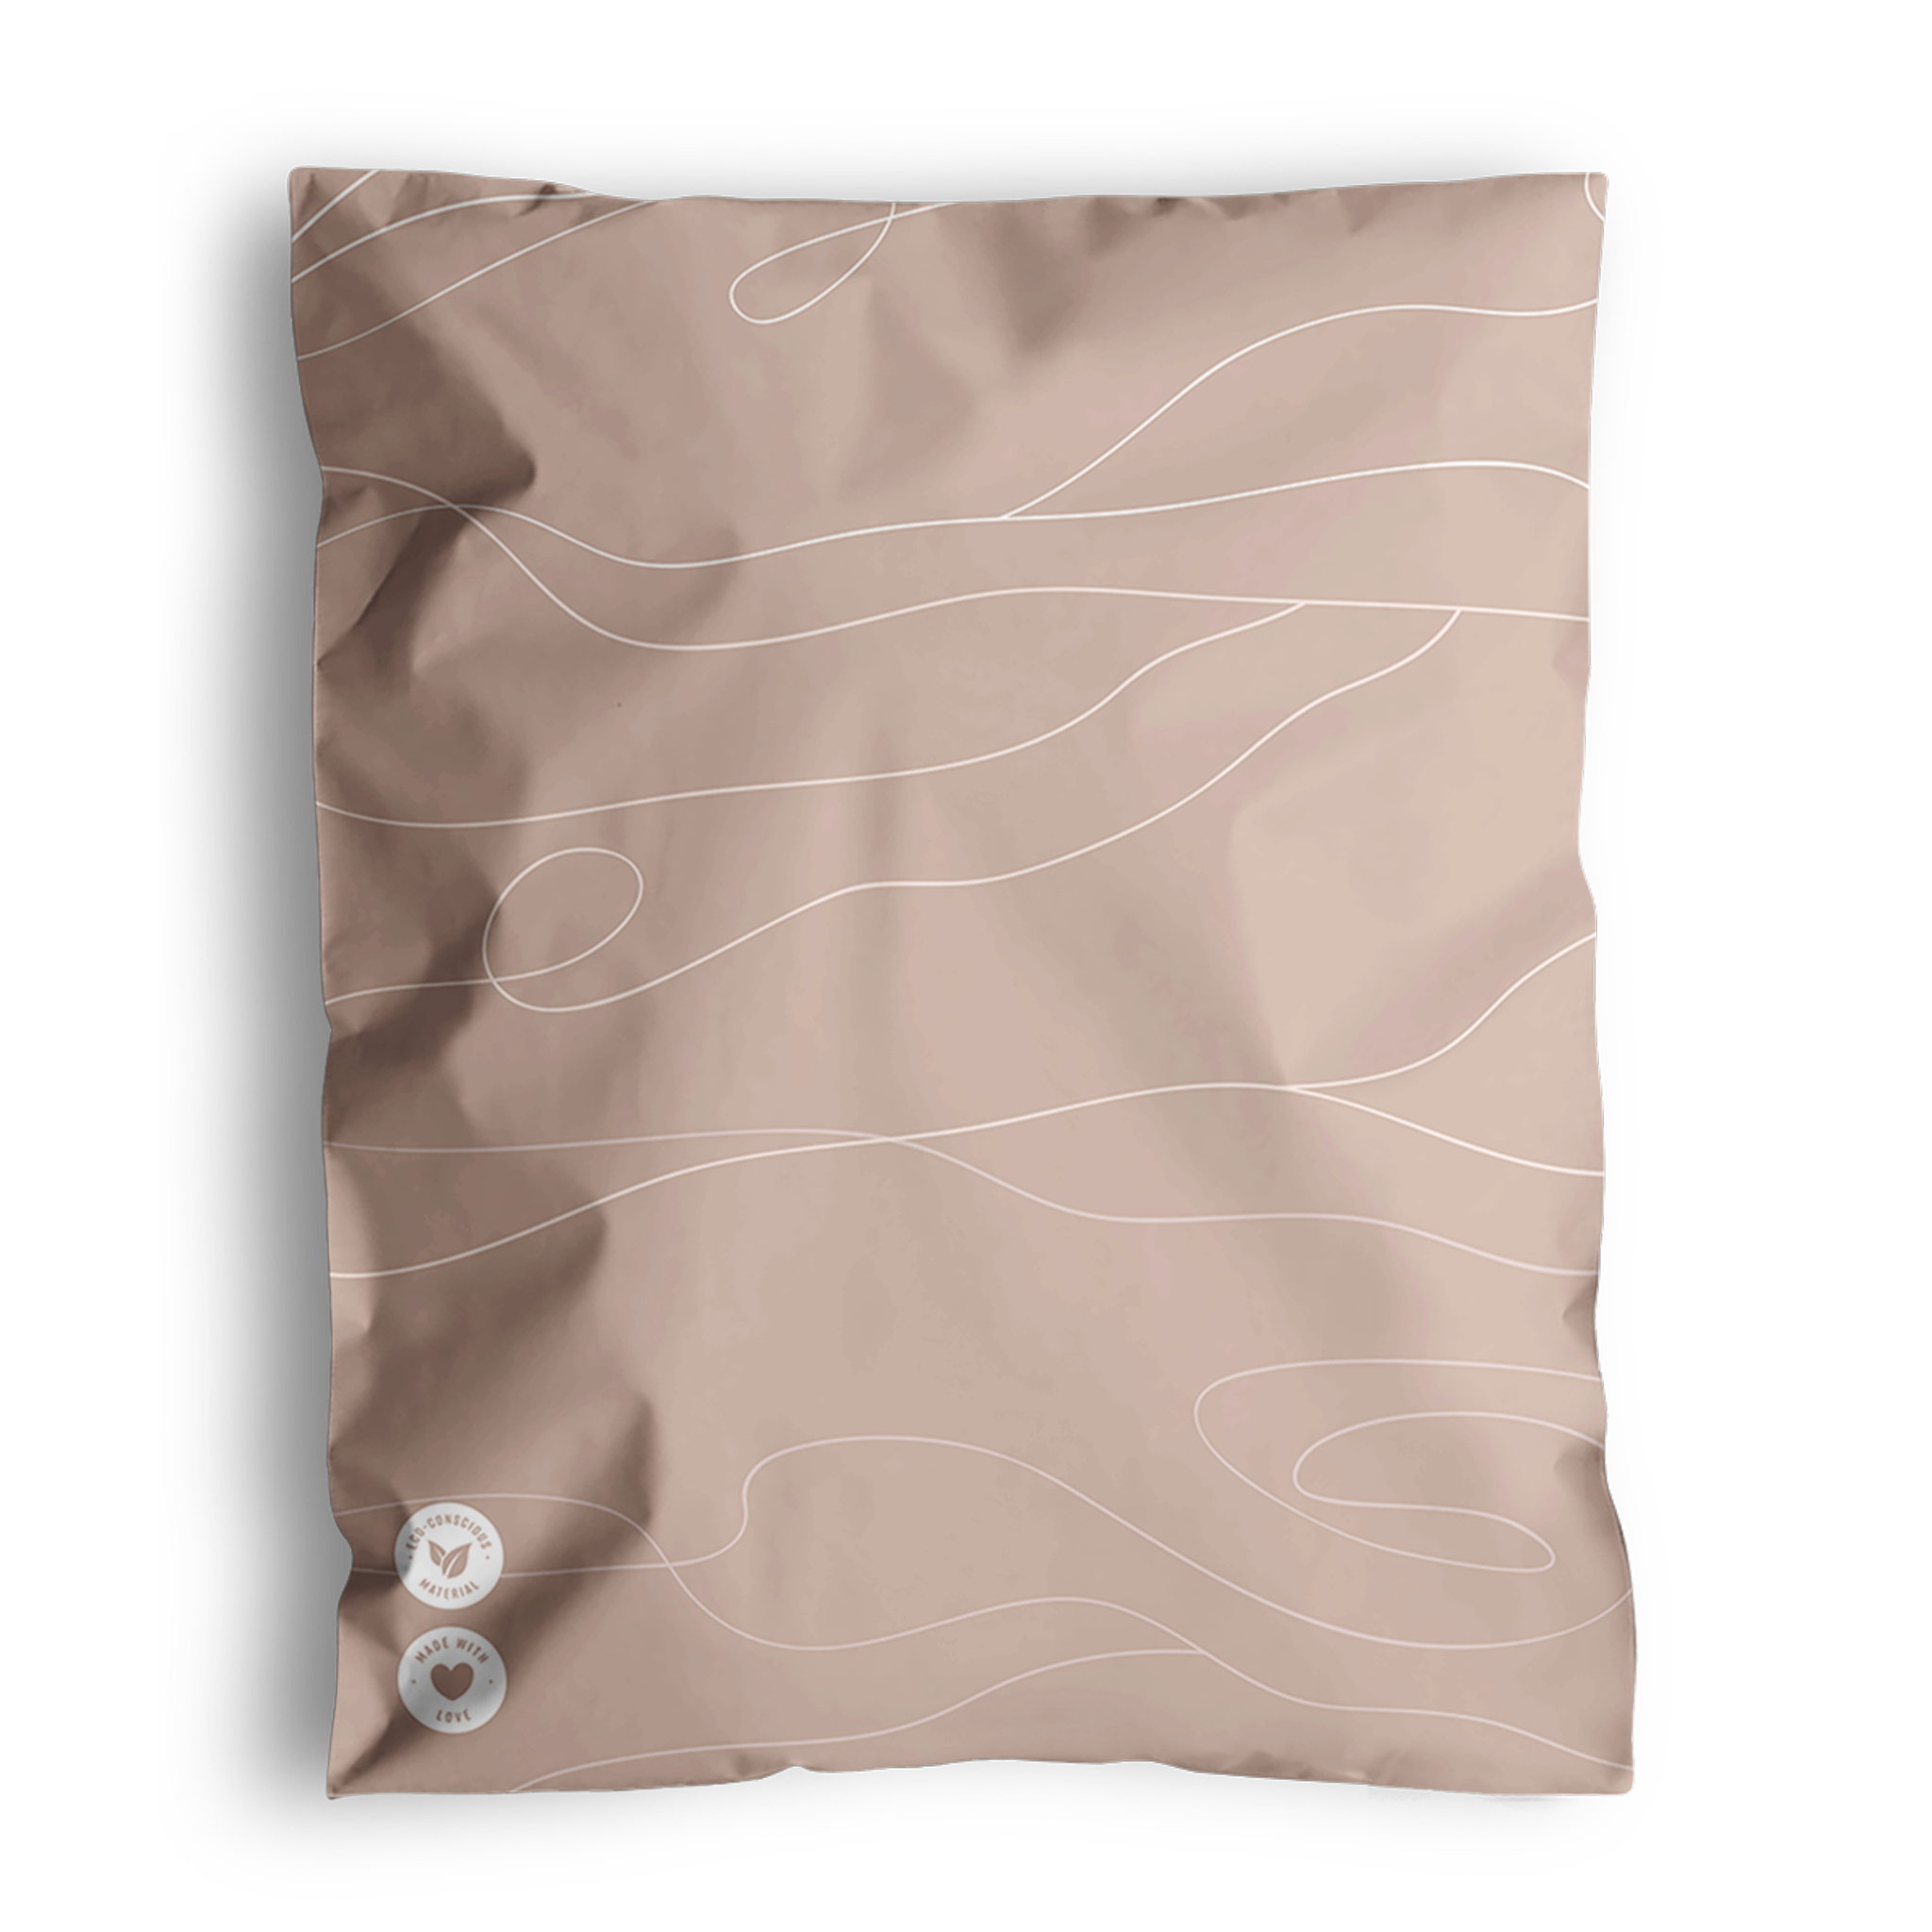 A crumpled, beige packaging bag with wavy white lines design and two white stickers at the bottom left corner showcases versatile packaging, offering both style and practicality. The product is Tidal Sand Mailers 10" x 13" from impack.co.